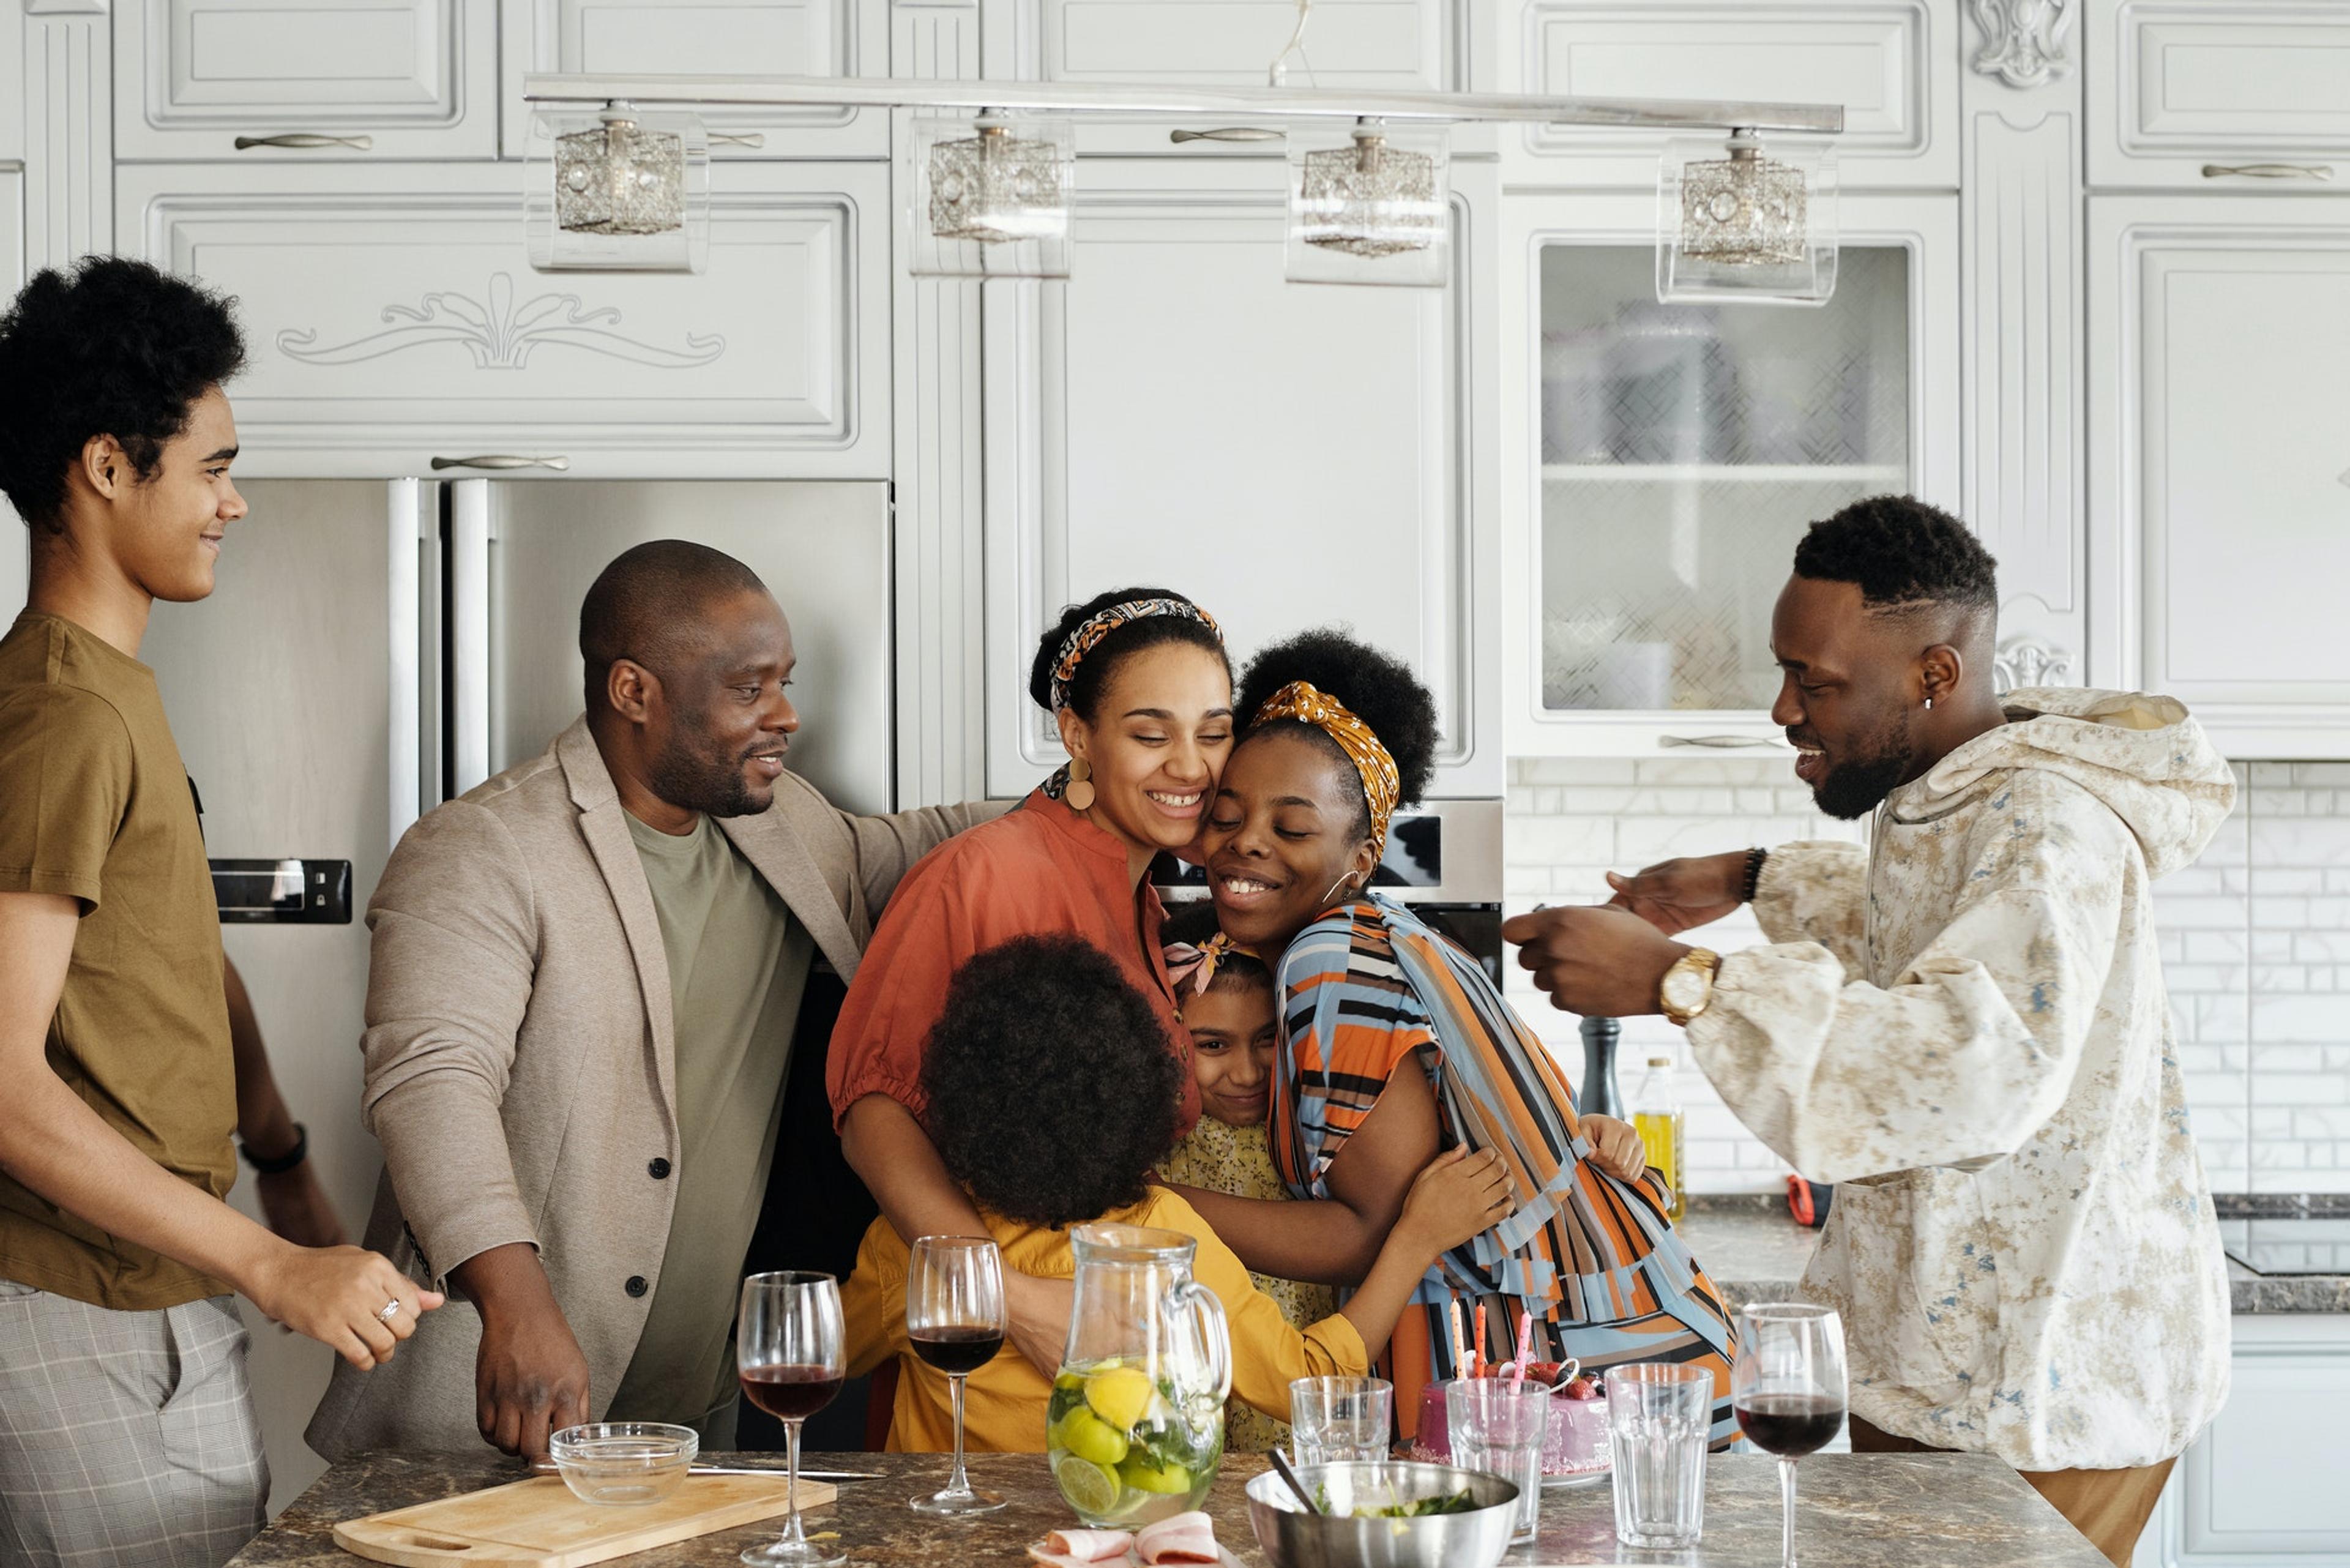 A Black family embraces in the kitchen around an island counter